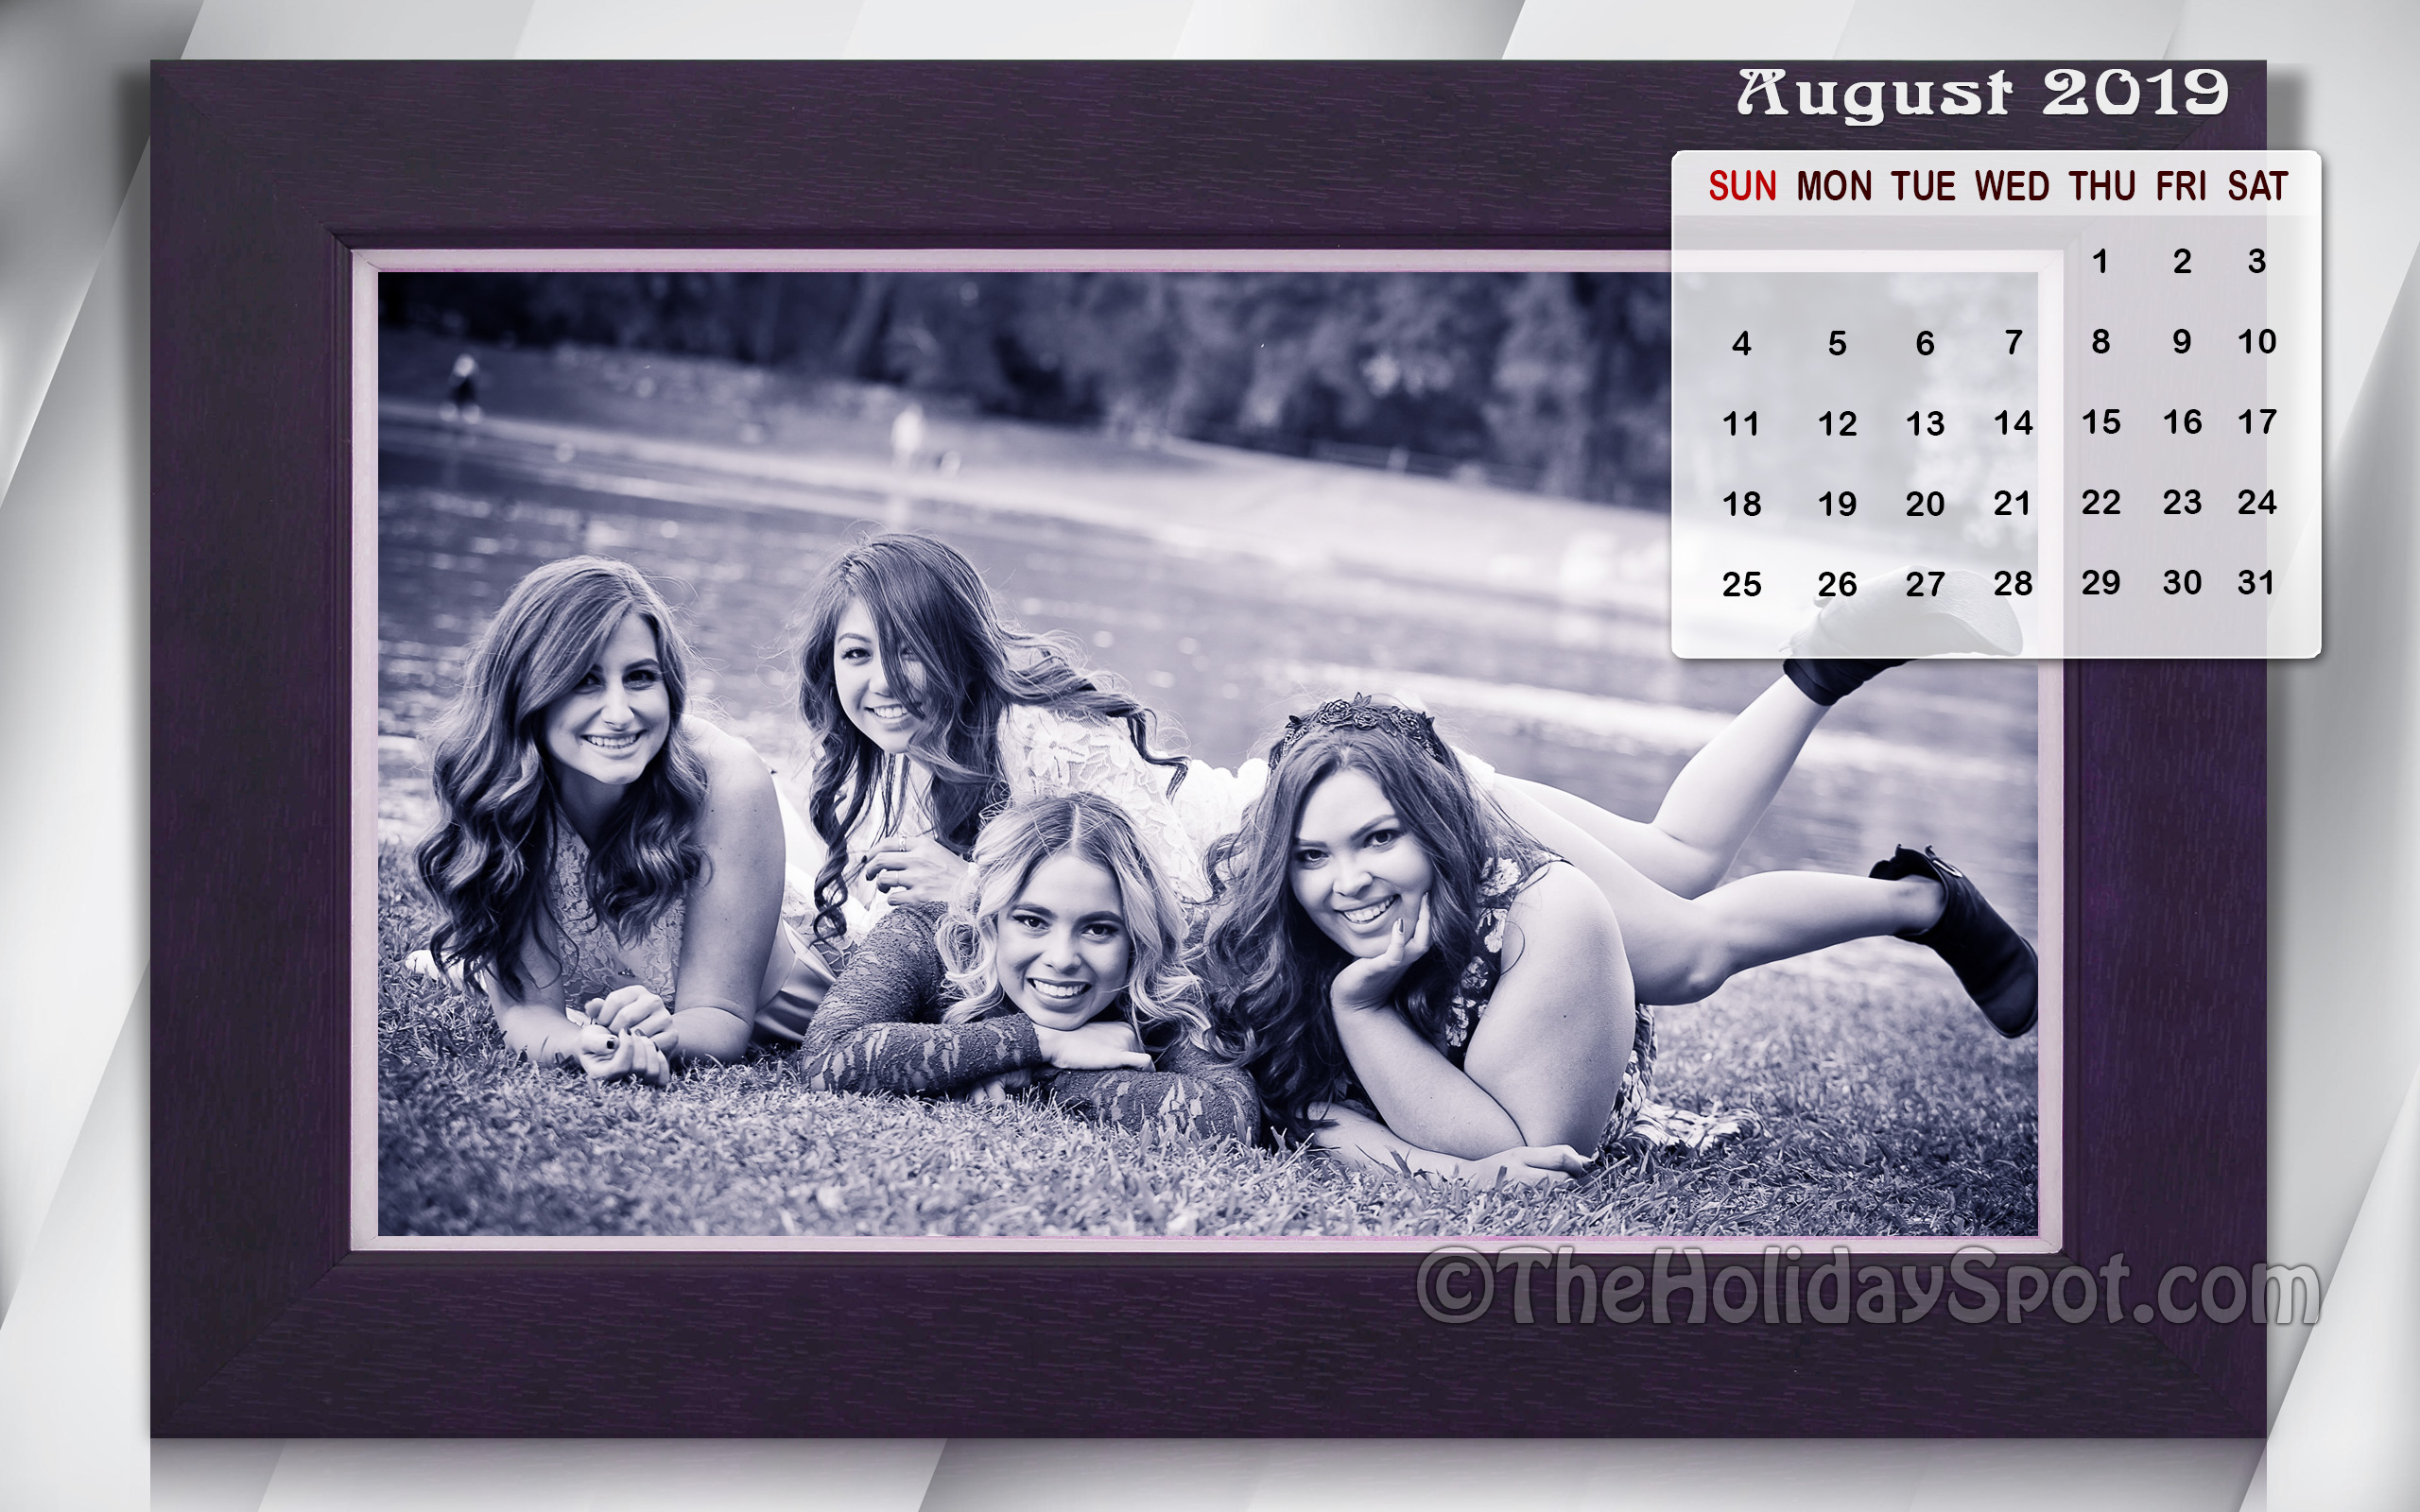 August 2019 Calendar Wallpaper Themed With Some Beautiful - Calendar Wallpaper January 2019 Girl - HD Wallpaper 